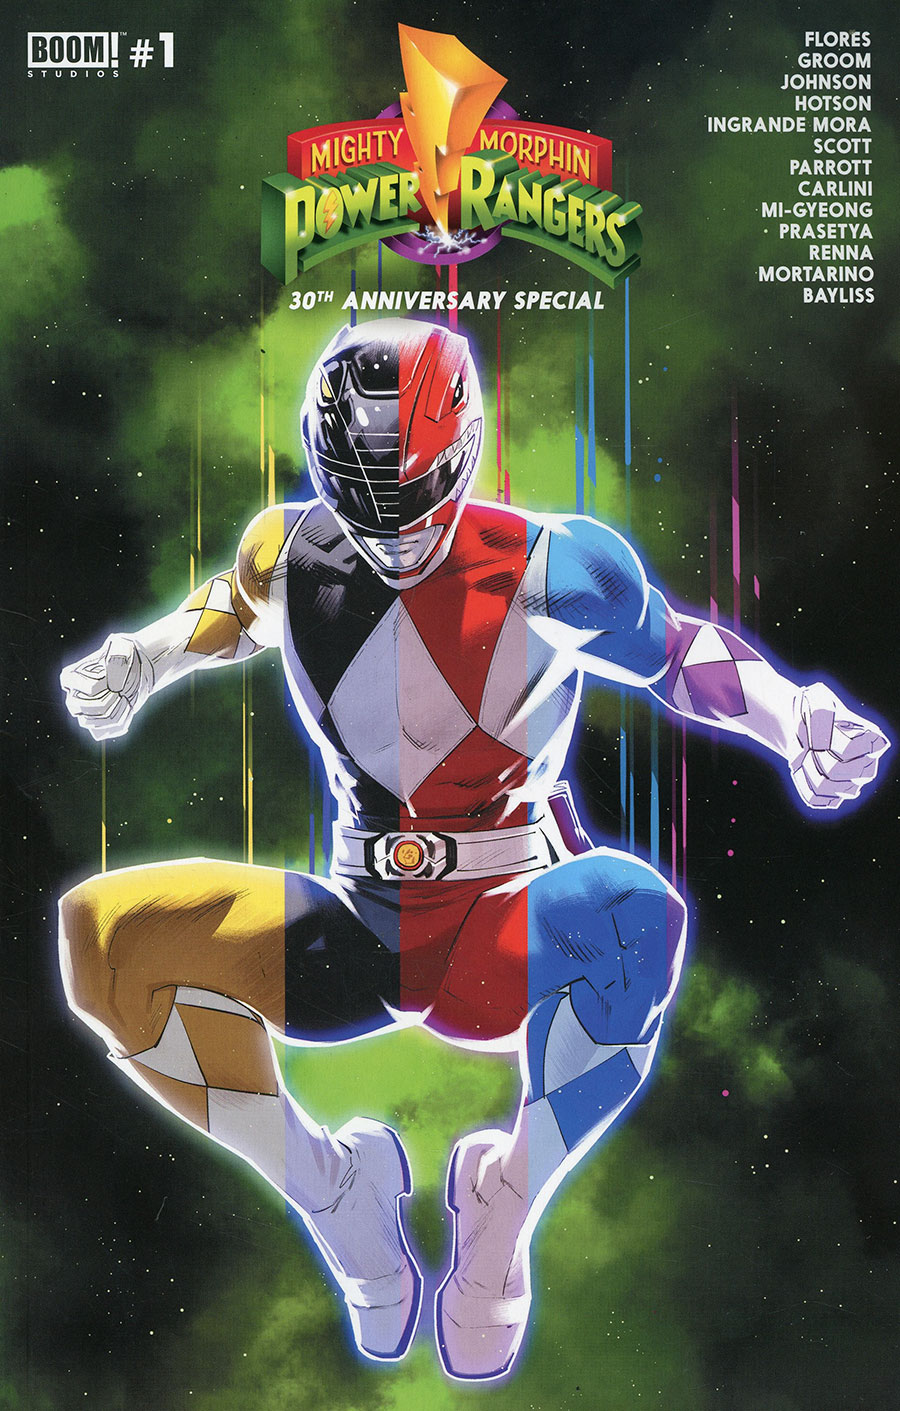 Mighty Morphin Power Rangers 30th Anniversary Special #1 (One Shot) Cover A Regular Dan Mora Cover